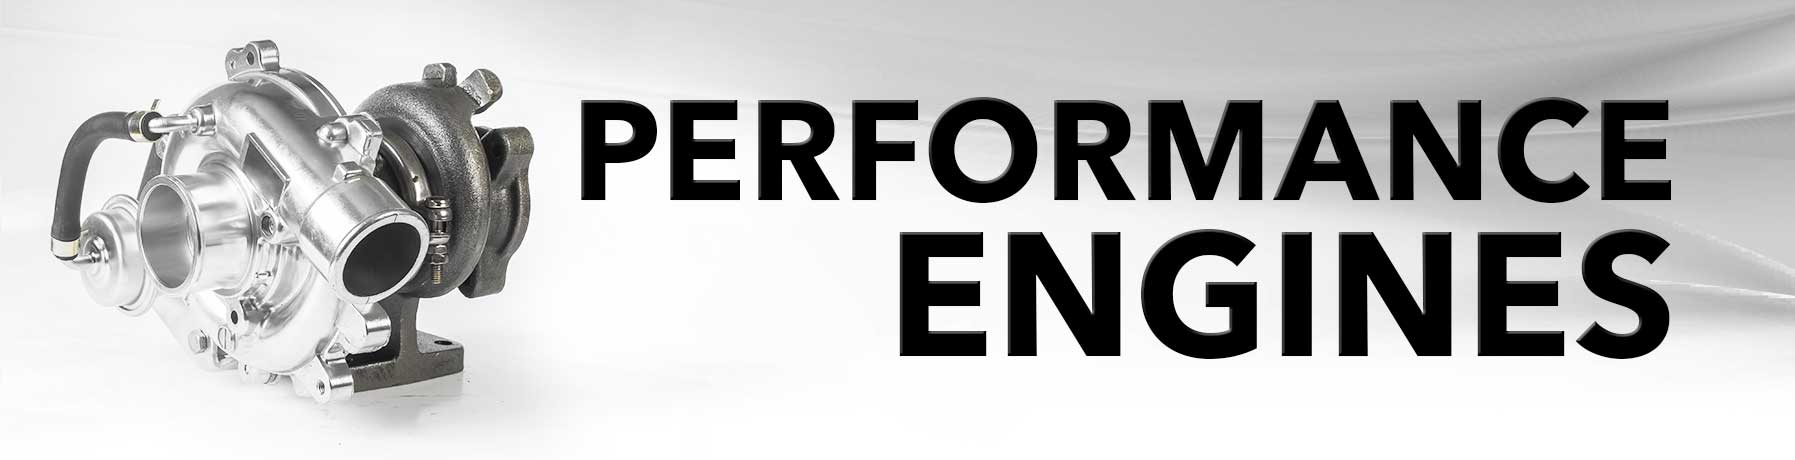 Performance Engine Services Banner